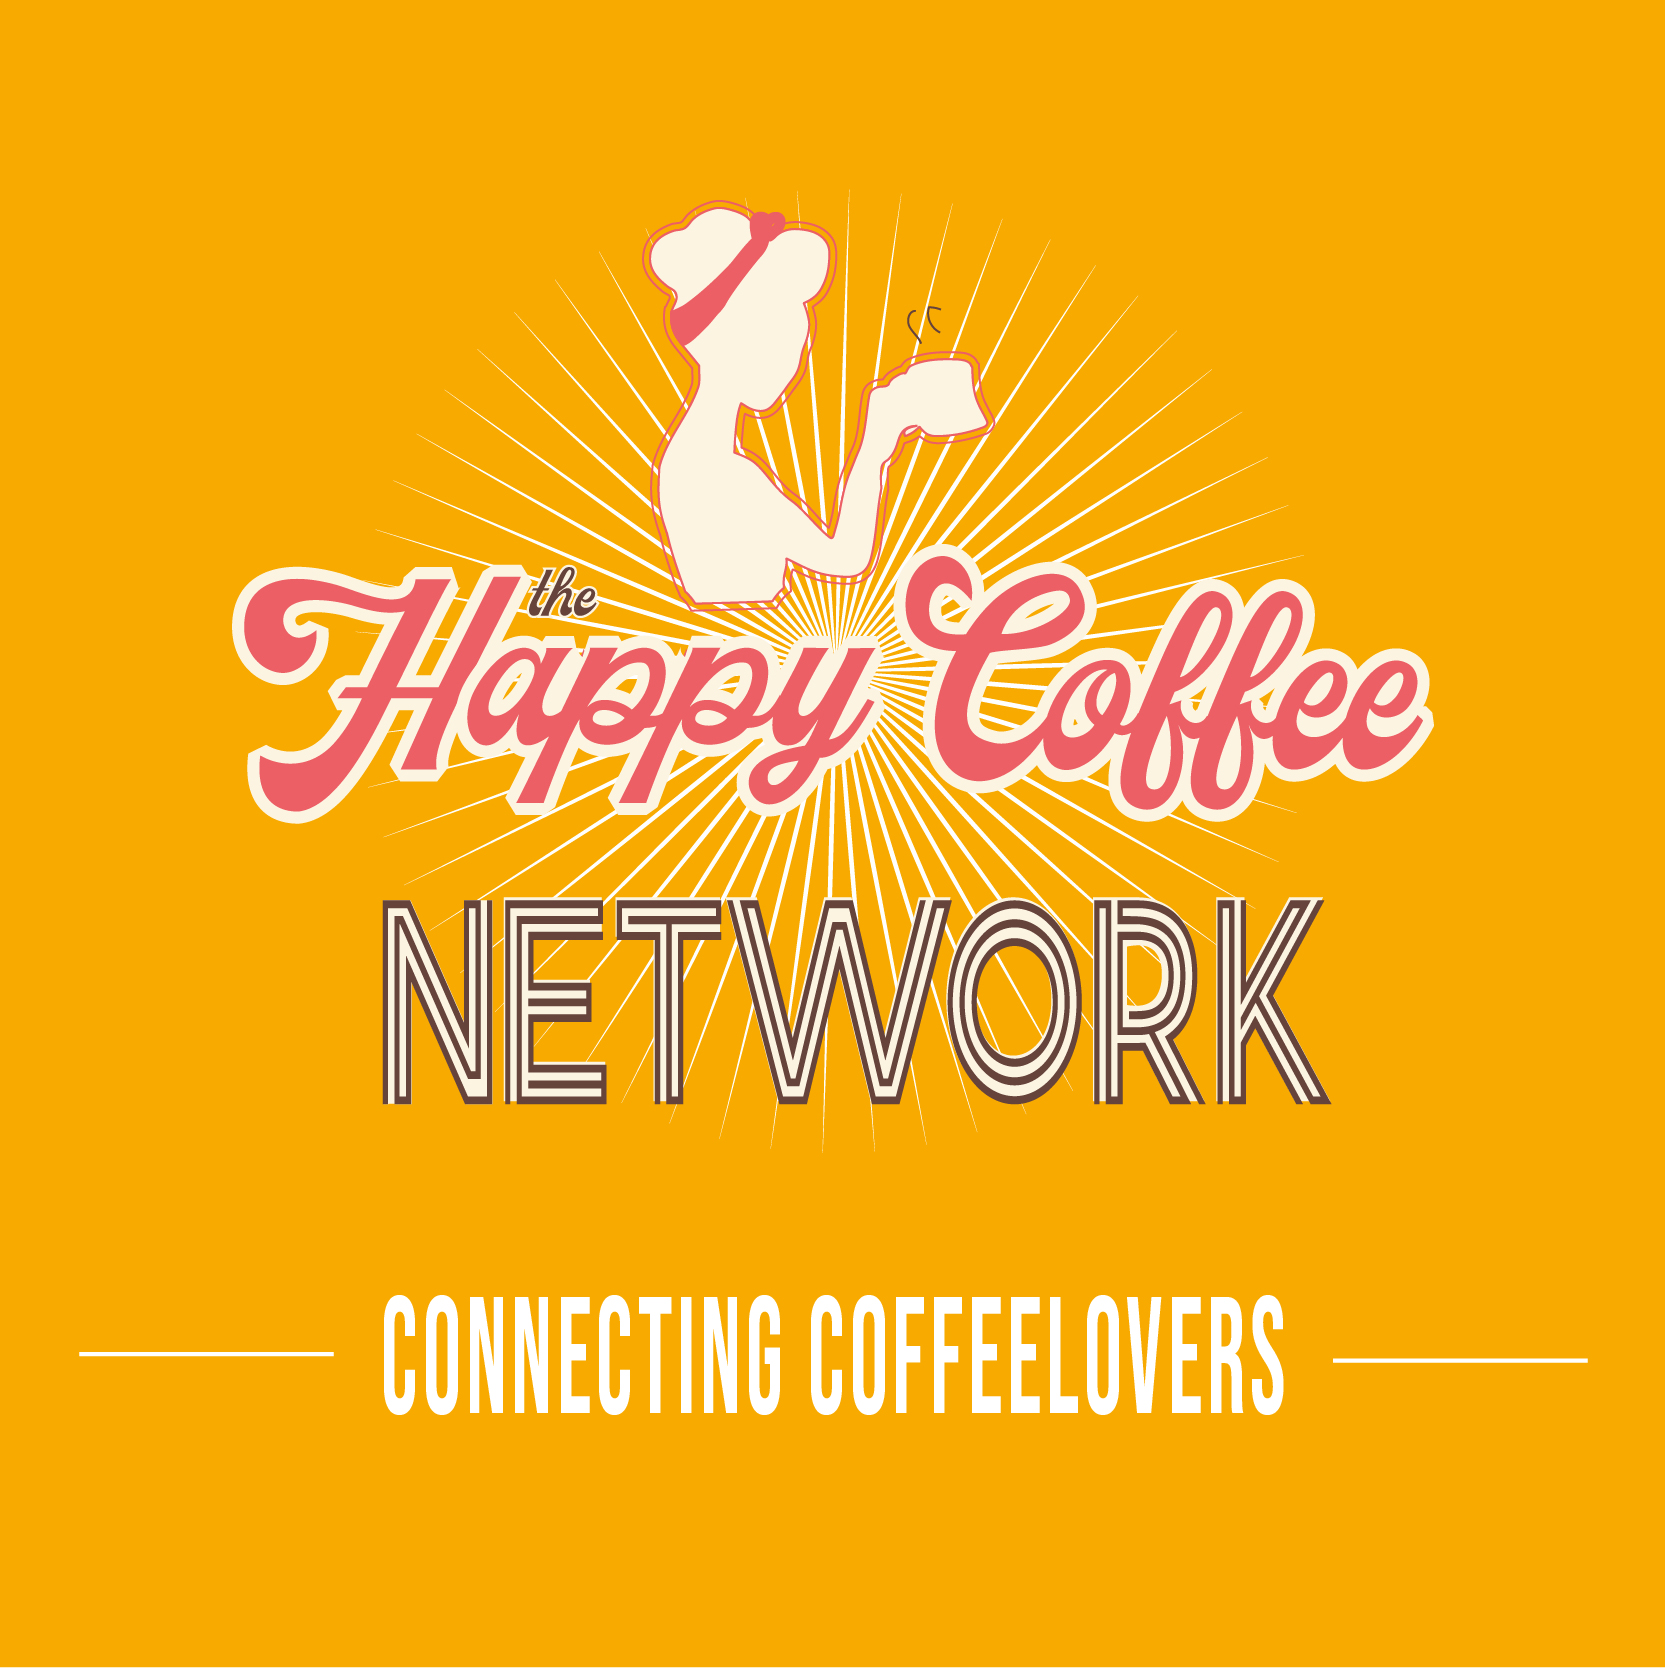 The Happy Coffee Network